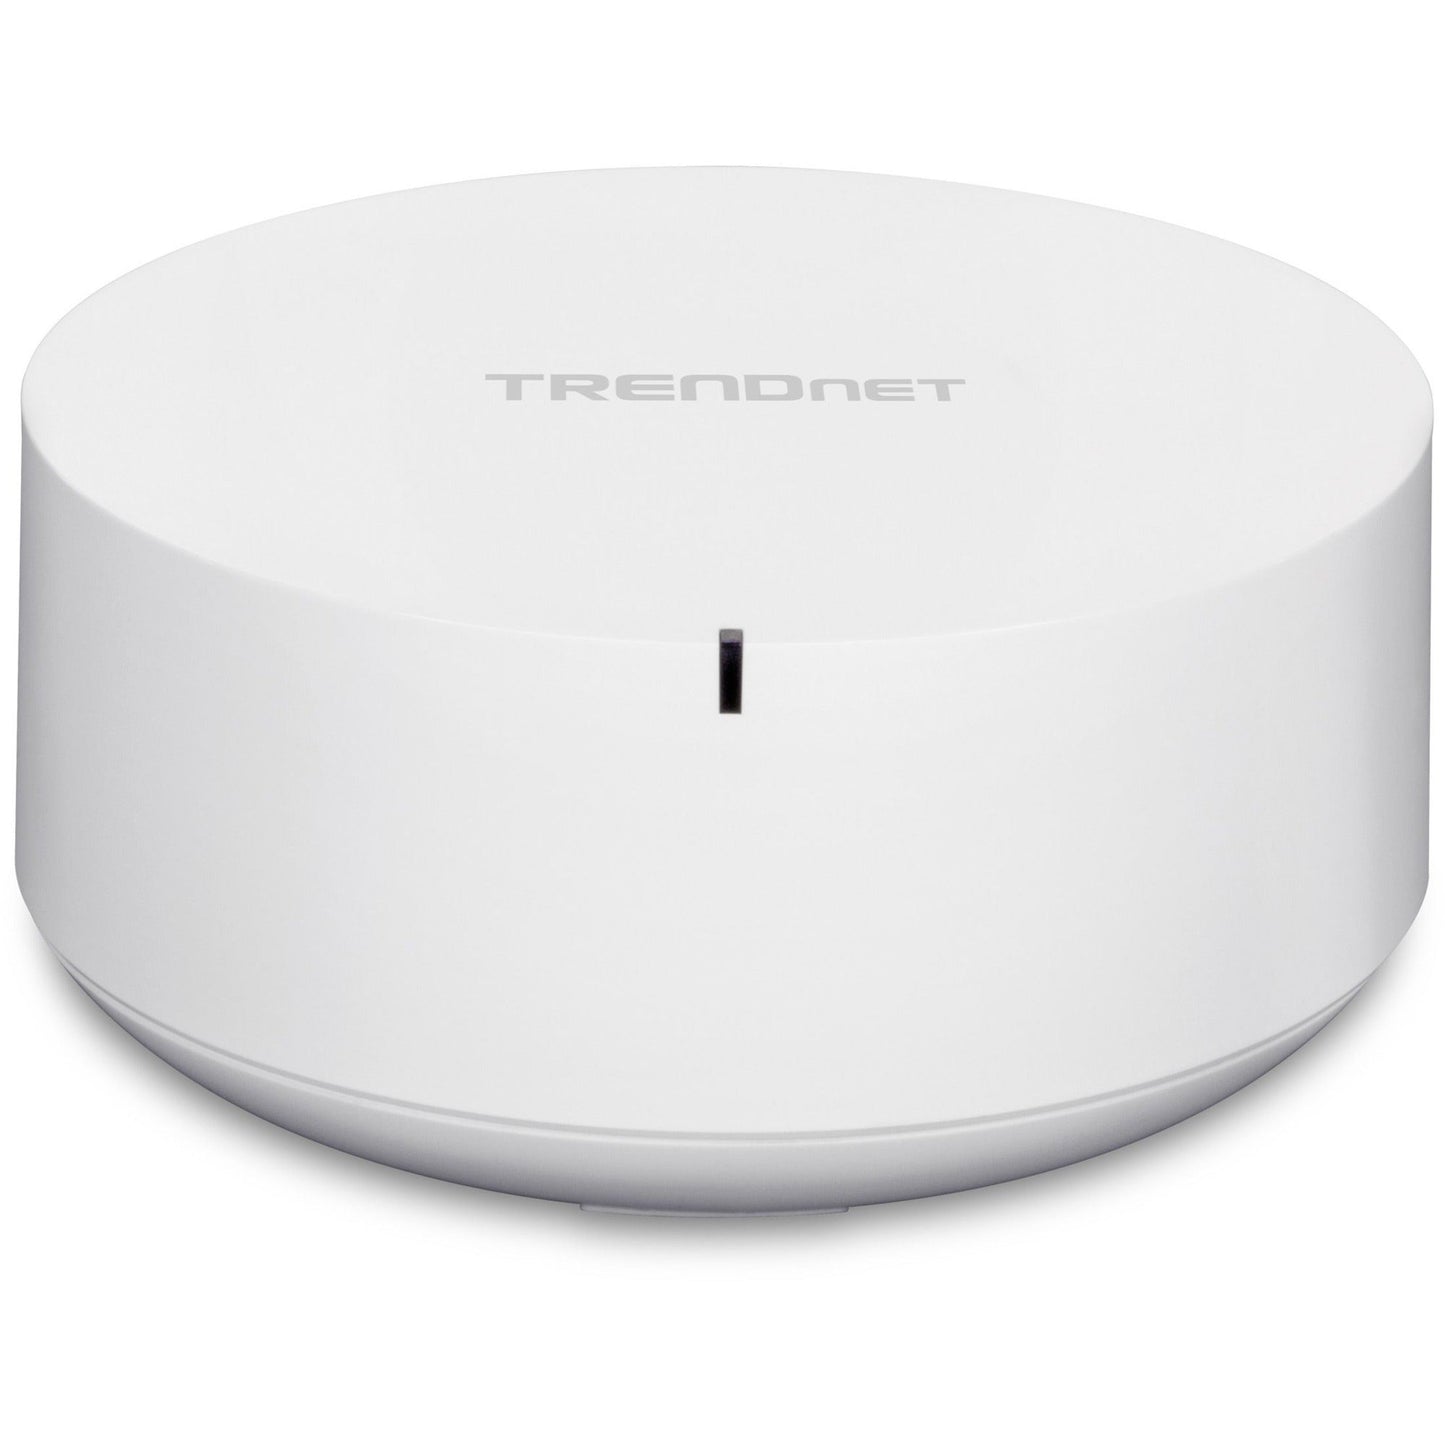 TRENDnet AC2200 WiFi Mesh Router System; TEW-830MDR2K;2 x AC2200 WiFi Mesh Routers; App-Based Setup; Expanded Home WiFi(Up to 4;000 Sq Ft. Home); Content Filtering w/Router Limits;Supports 2.4Ghz/5GHz